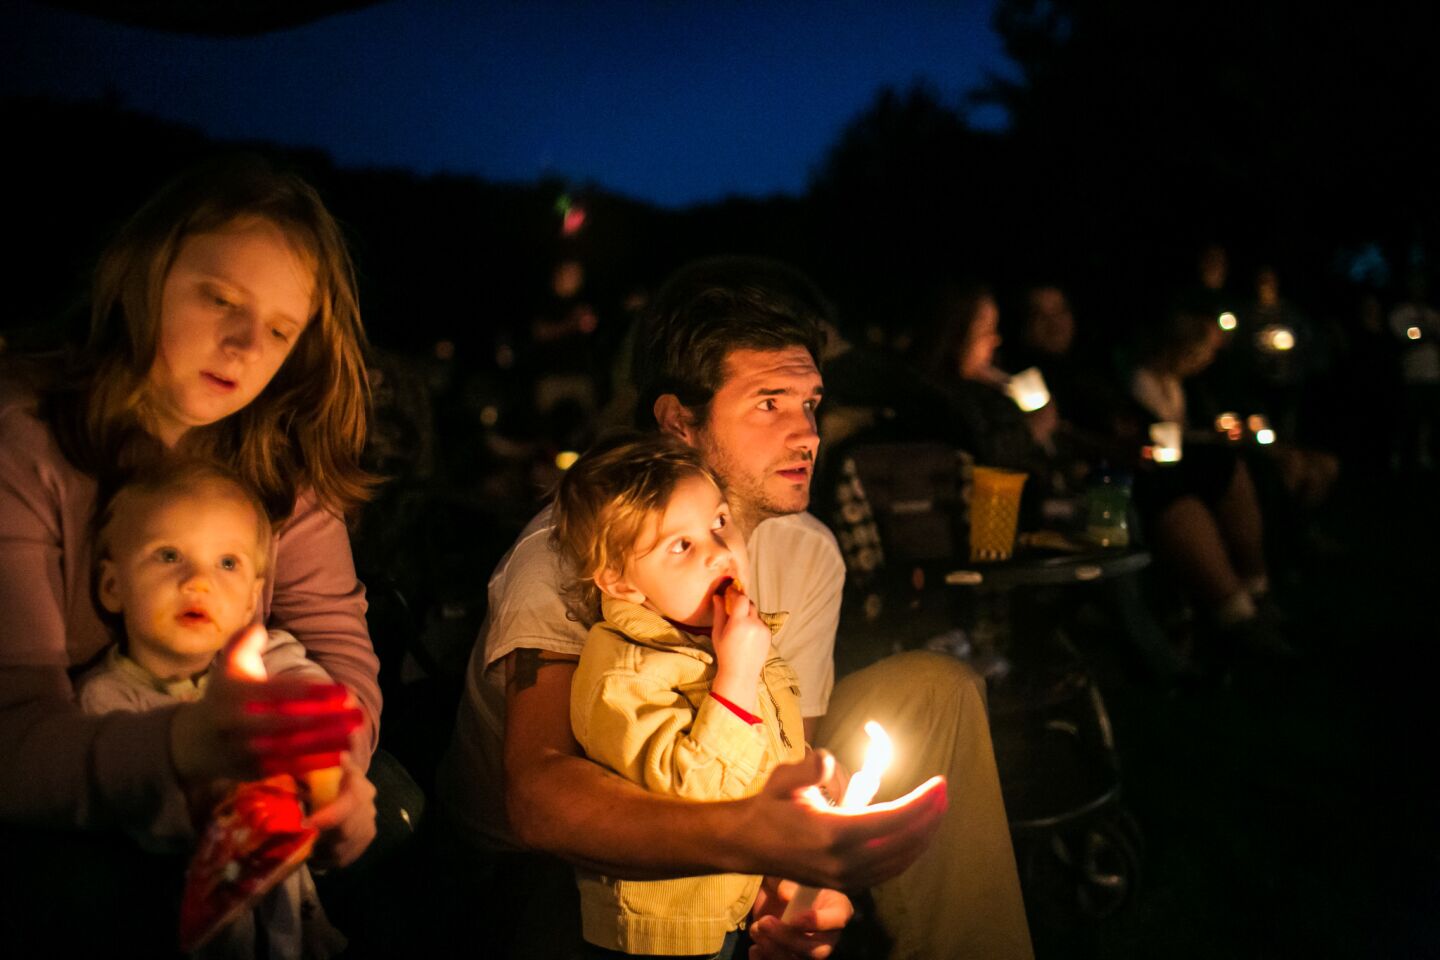 Christina and Kyle Workman attend a vigil on Oct. 3 at Riverbend Park in Winston, Ore., for victims of the mass shooting.